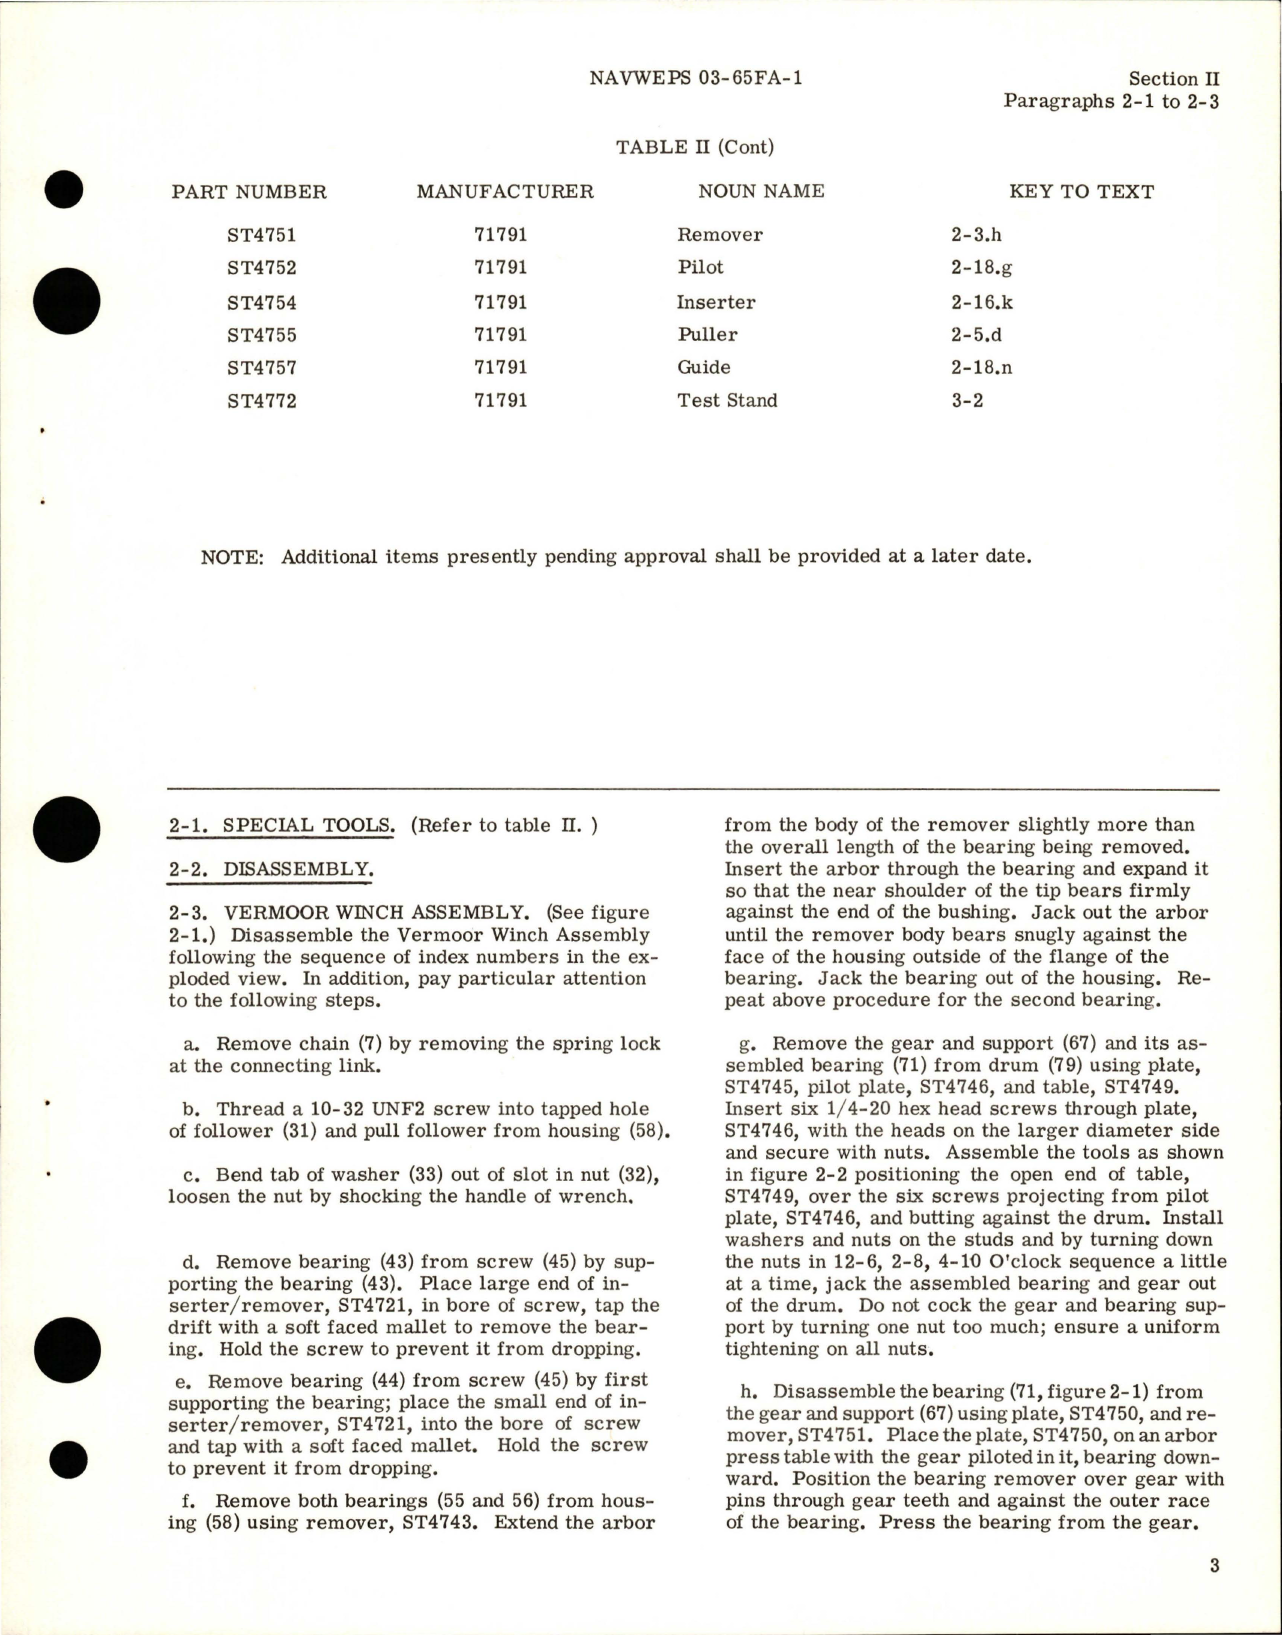 Sample page 7 from AirCorps Library document: Overhaul Instructions for Vermoor Winch Assembly - Part 172750